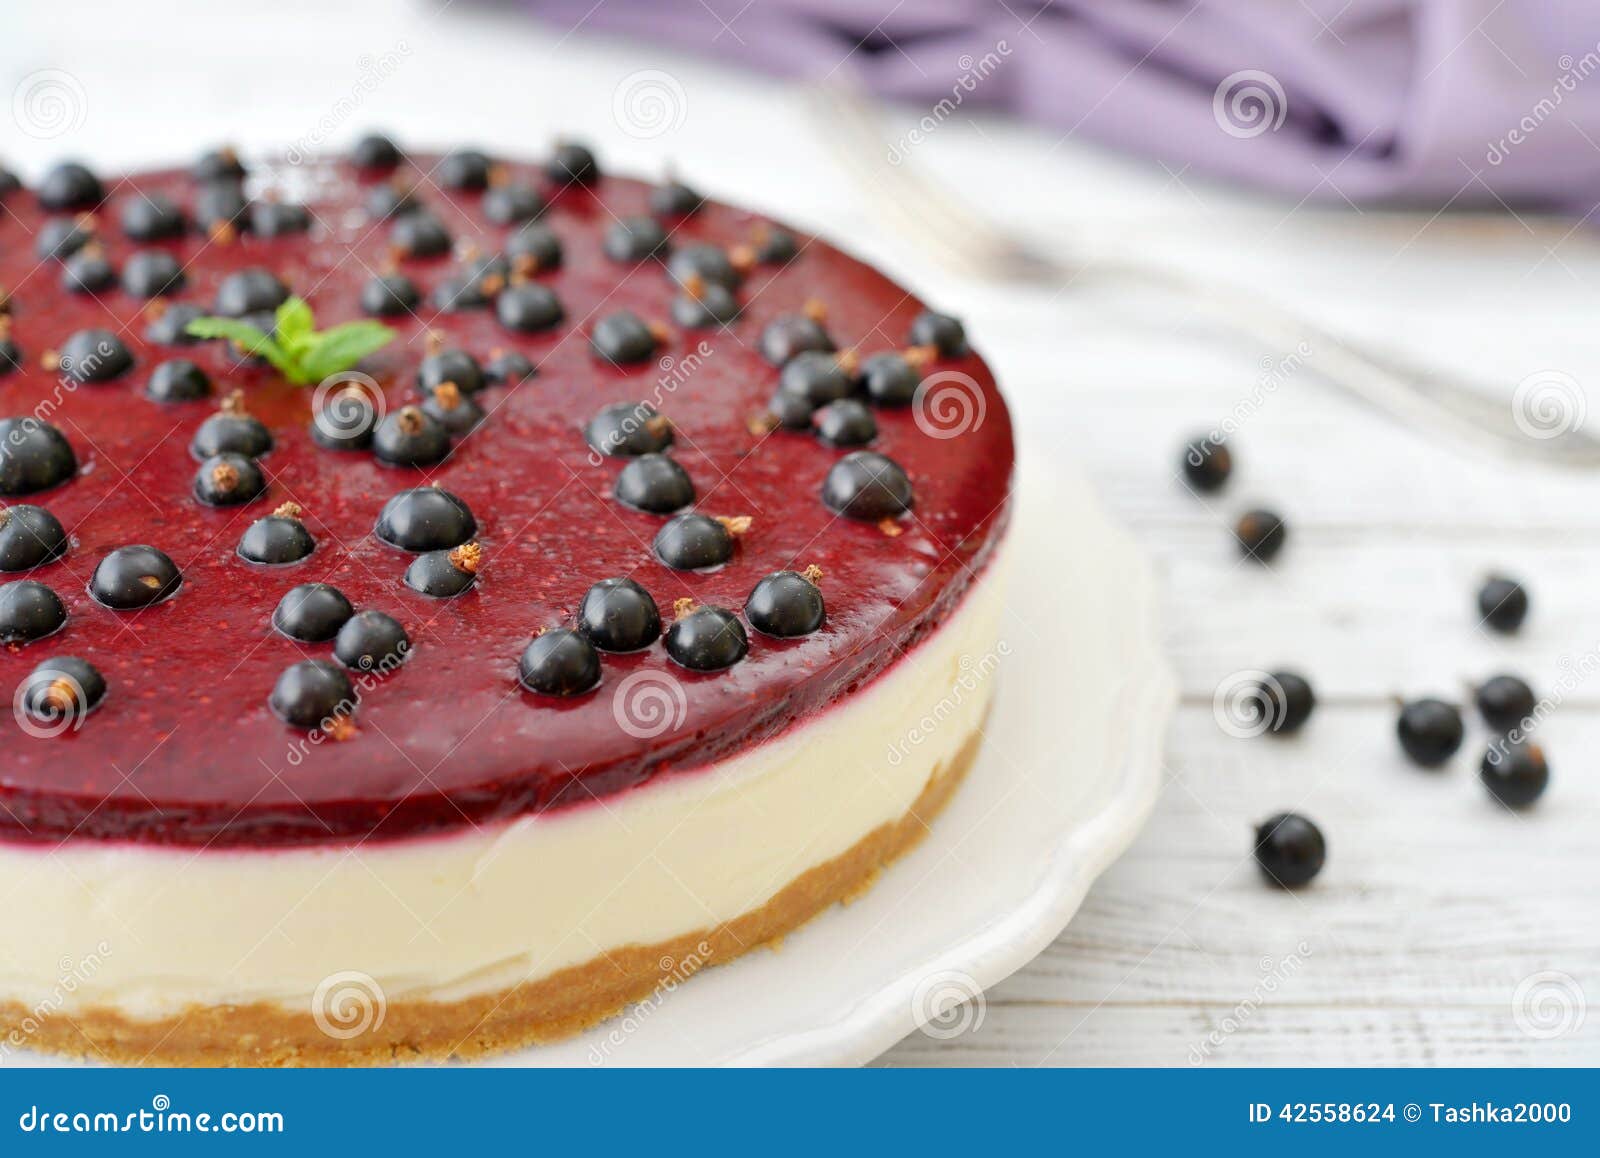 Black currant cheesecake stock photo. Image of wooden - 42558624